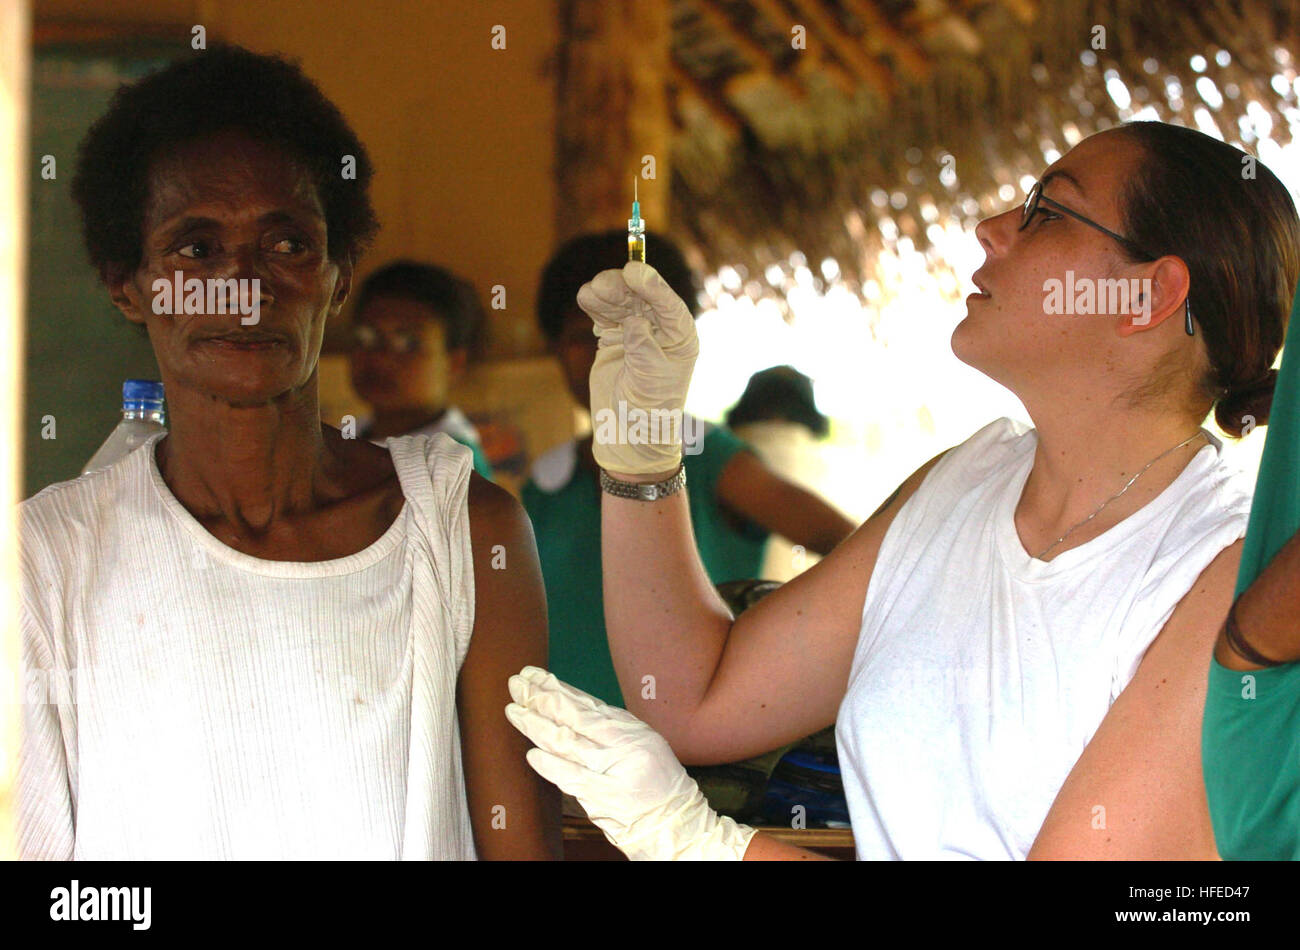 050518-N-1485H-006 Potts Dam, Papua New Guinea (May 18, 2005) Ð Hospitalman Jessica Mayer of Mariss, Ill., preps a syringe filled with measles, mumps and rubella vaccination before injecting a local woman the local village of Potts Dam. The Military Sealift Command (MSC) hospital ship USNS Mercy (T-AH 19) and the MSC combat stores ship USNS Niagara Falls (T-AFS 3) are currently station off the coast of Papua New Guinea to provide humanitarian assistance and focused medical care to the residents affected by a volcano eruption in the area. Navy photo by Photographer's Mate 3rd Class Lamel J. Hin Stock Photo